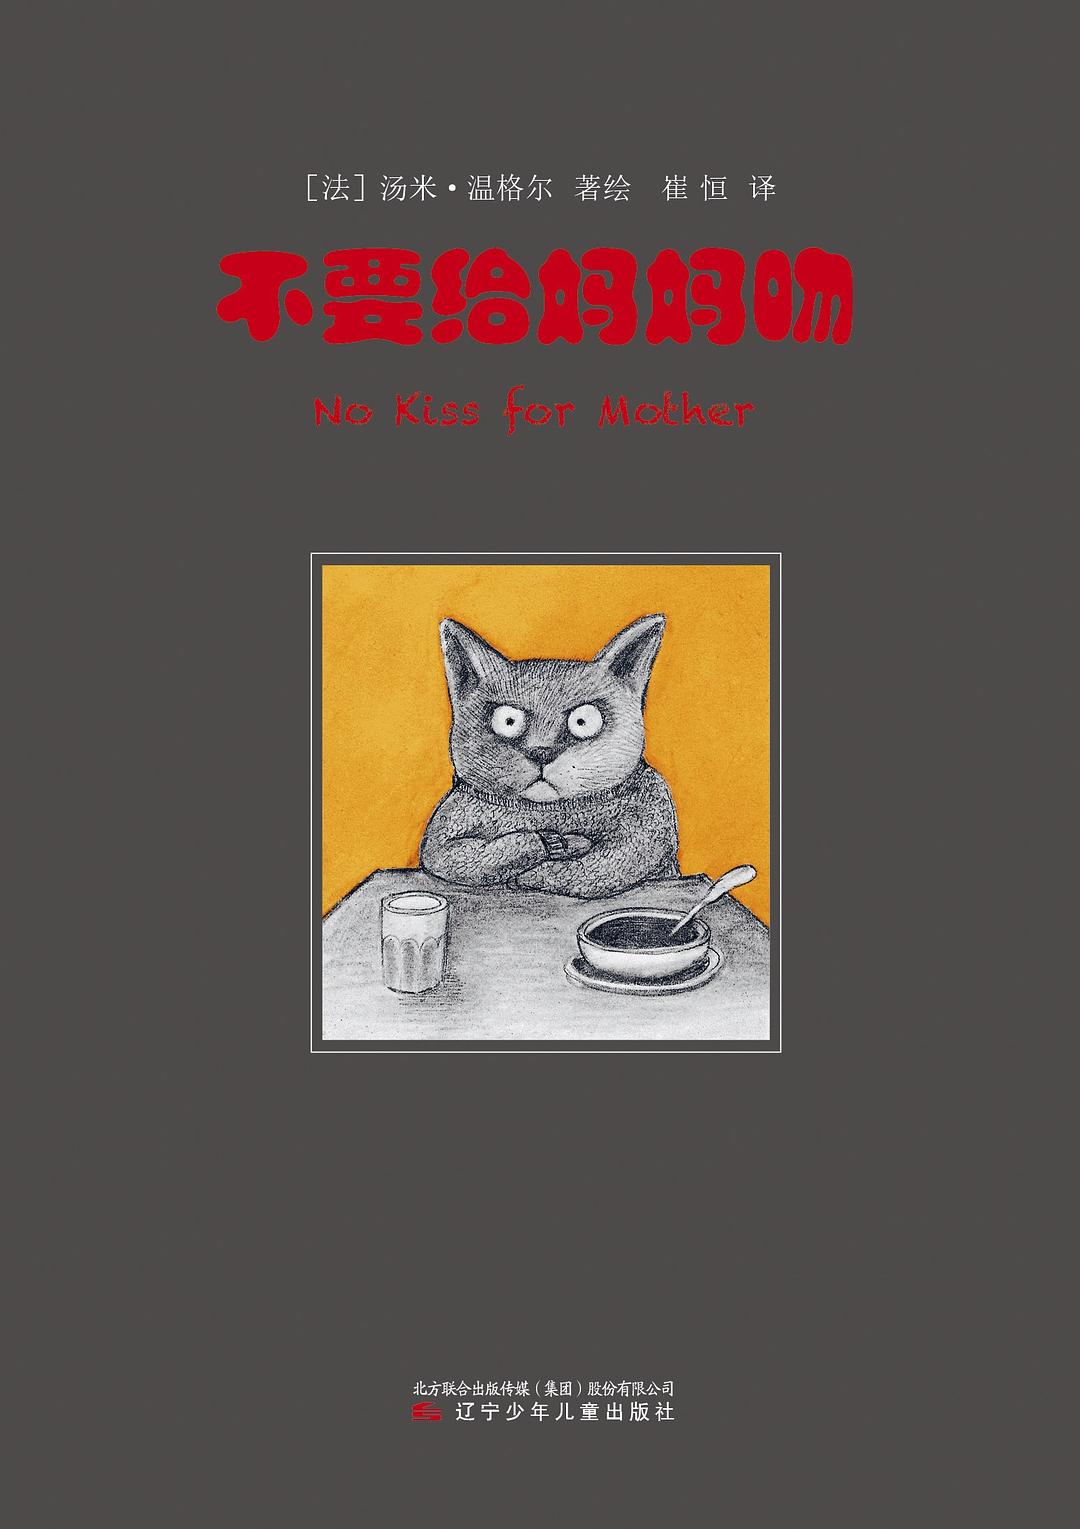 Now published in translation: Tomi Ungerer’s No Kiss for Mother in Simplified Chinese characters (in memoriam)